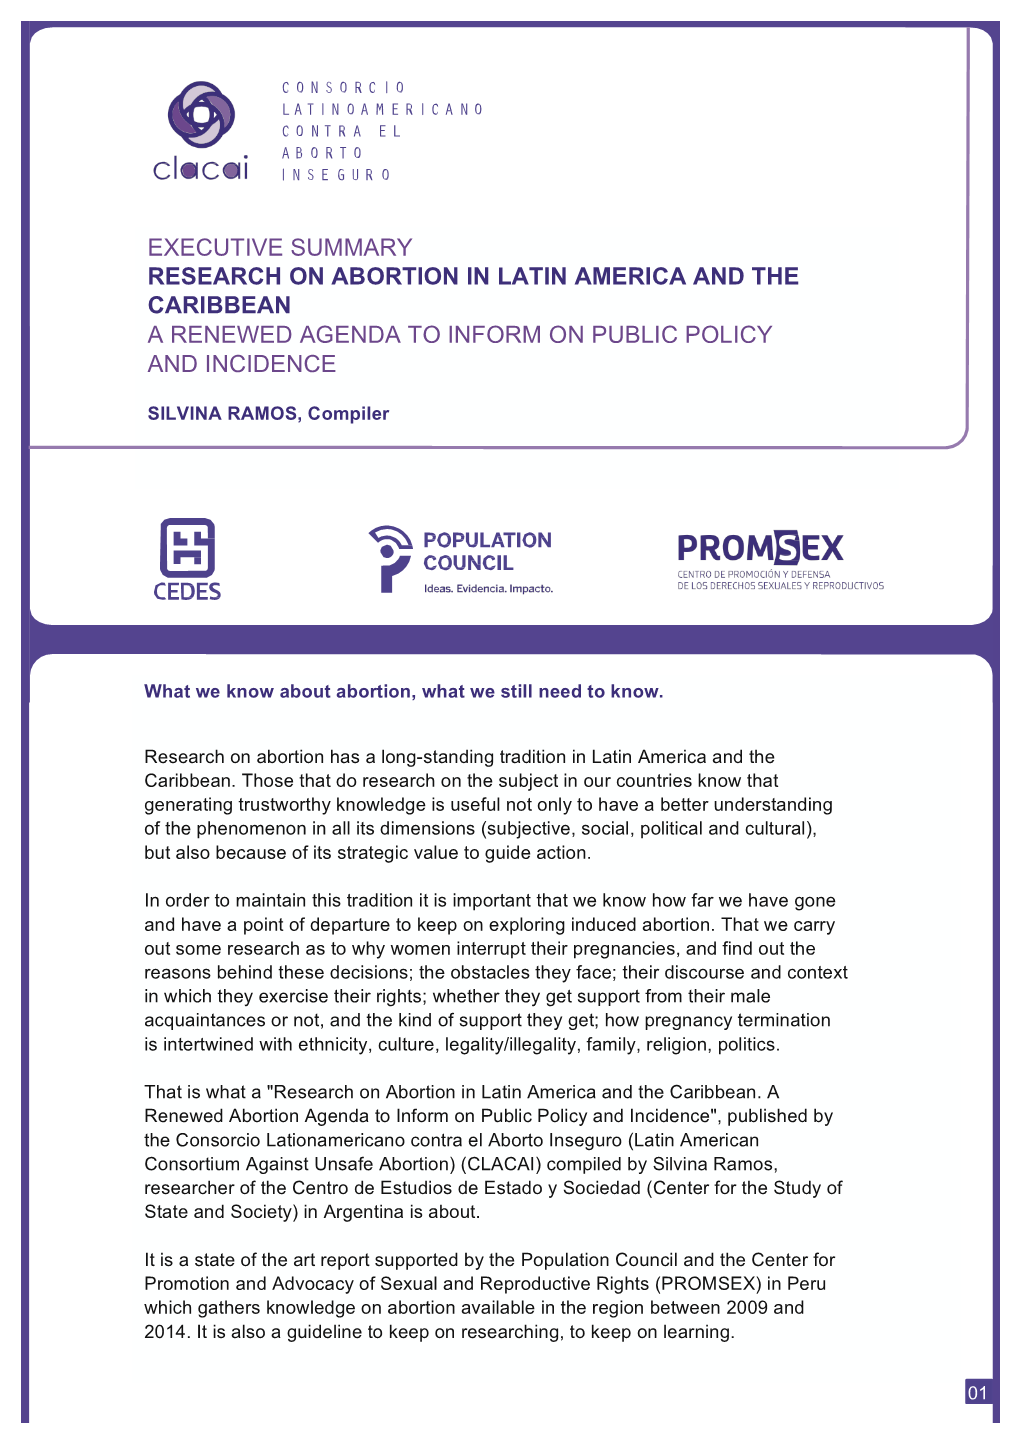 Executive Summary Research on Abortion in Latin America and the Caribbean a Renewed Agenda to Inform on Public Policy and Incidence